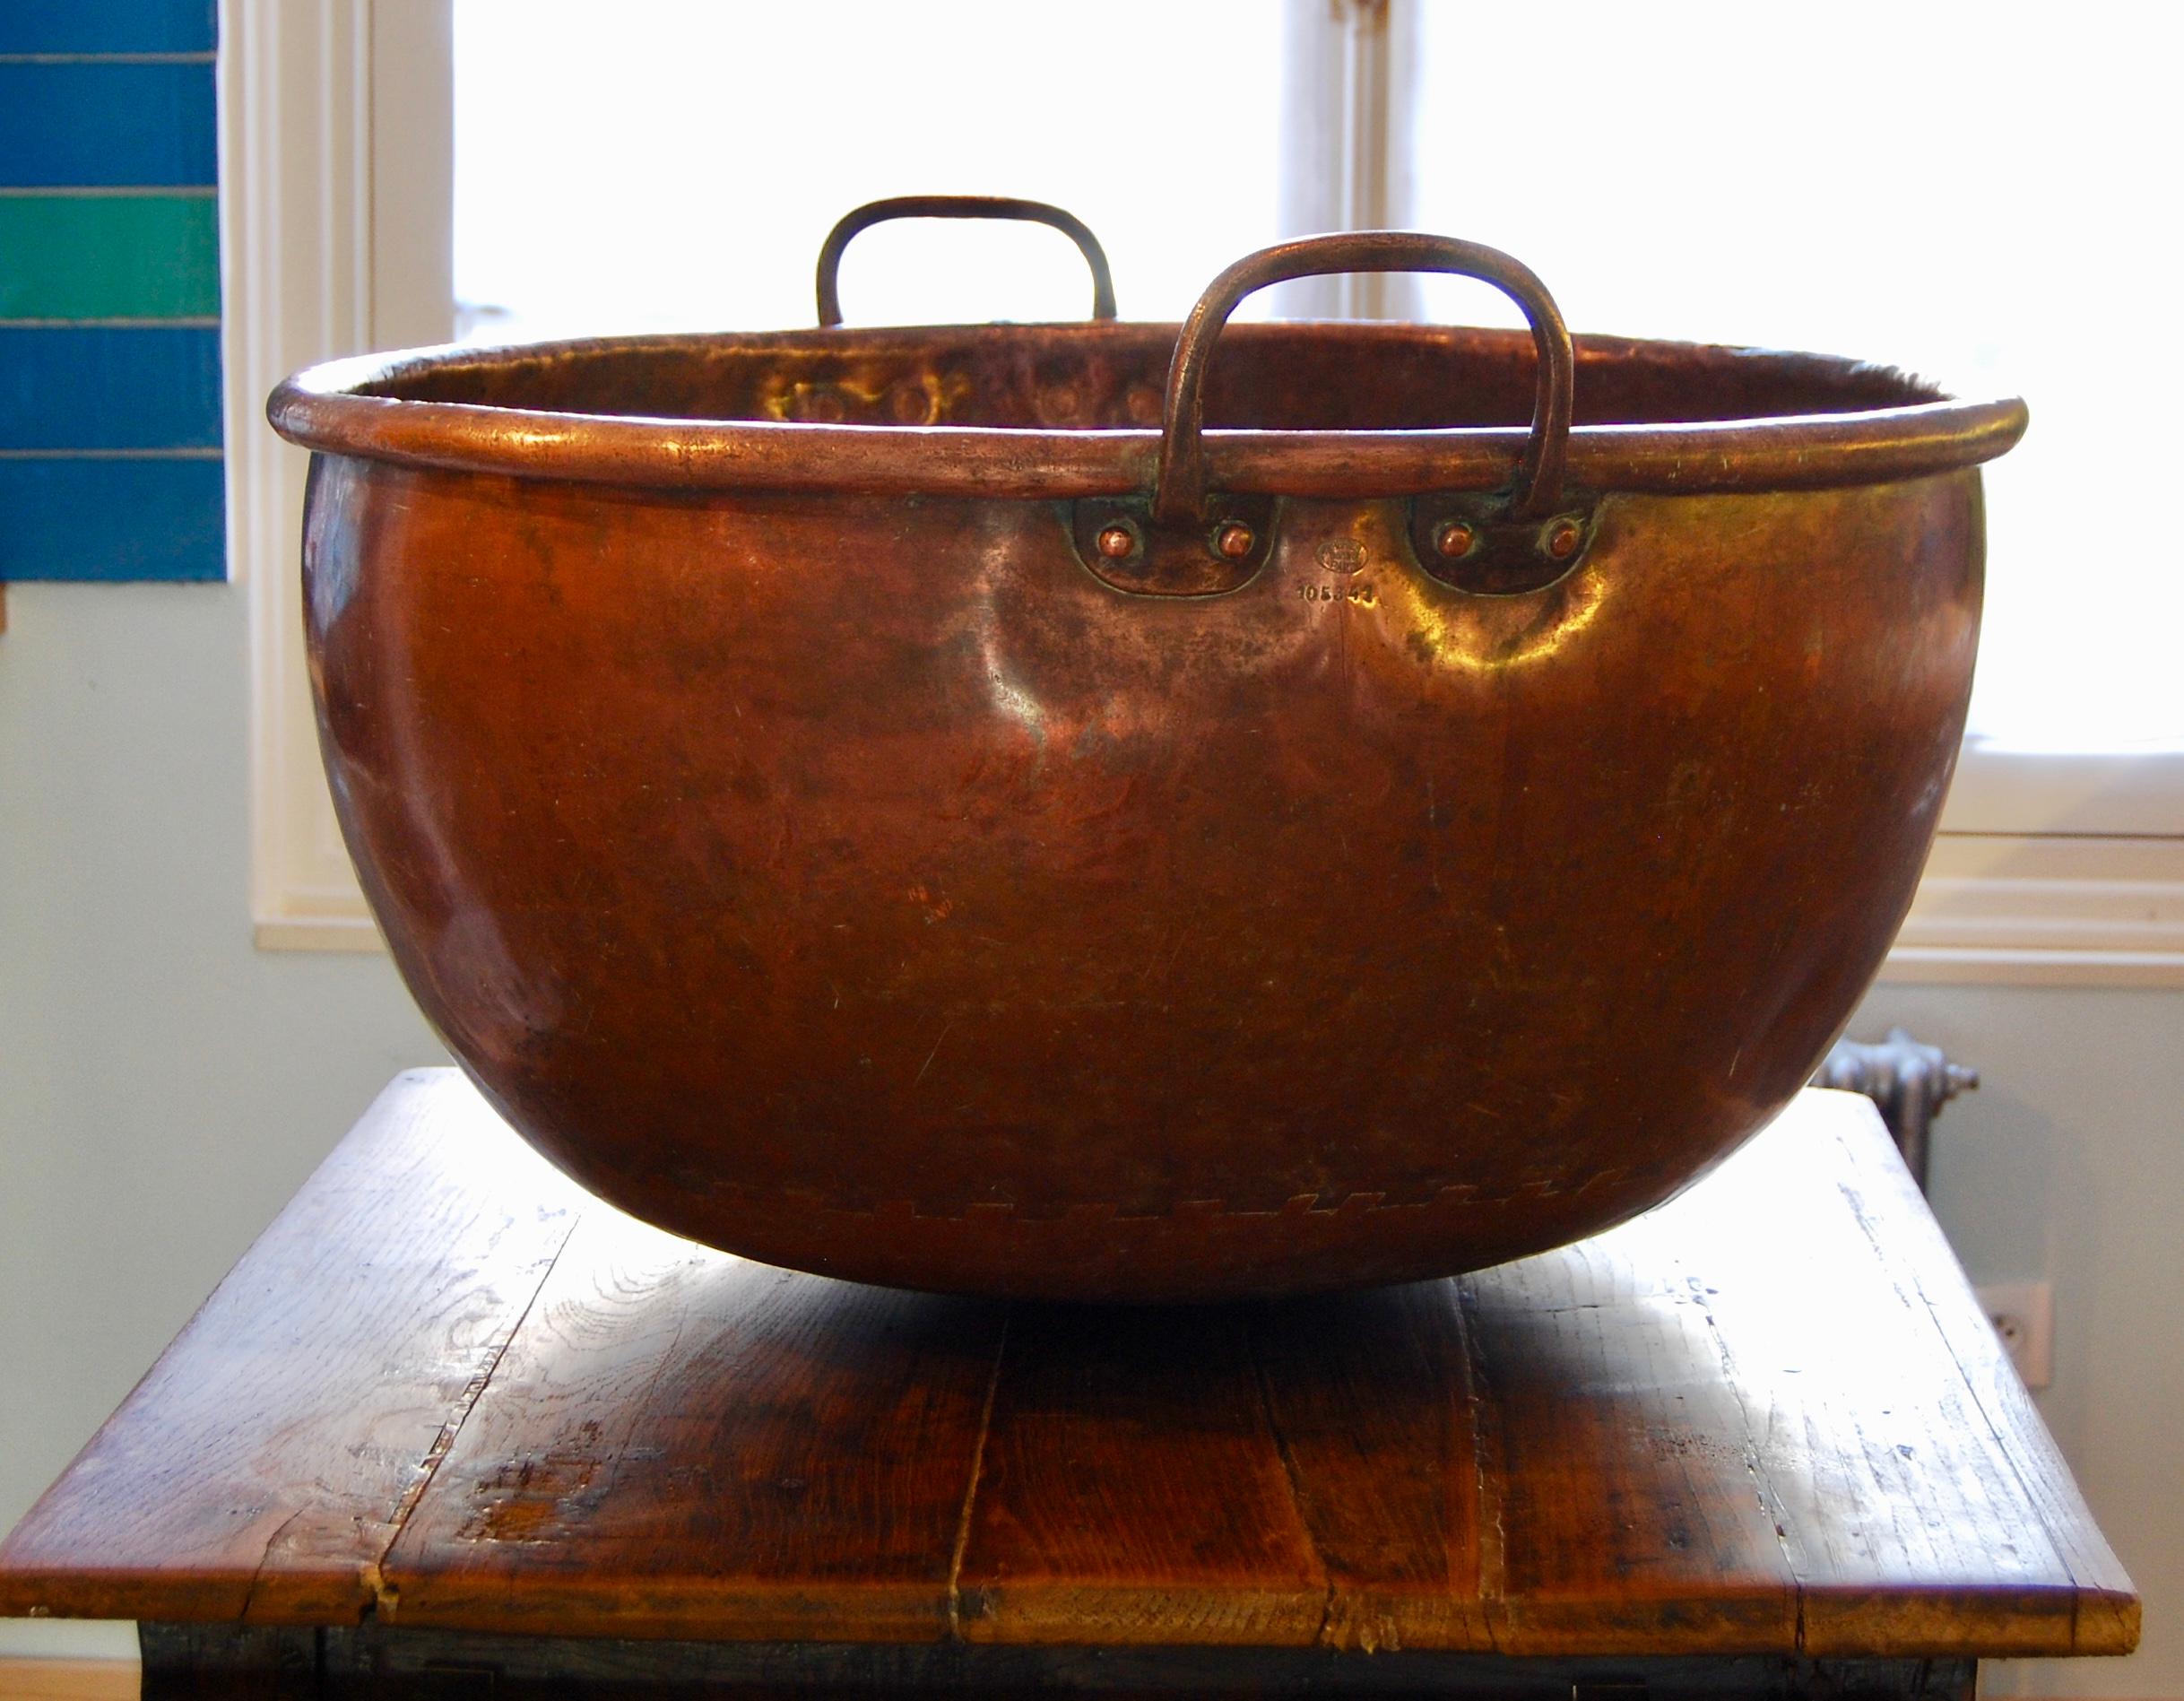 This impressive hand made solid copper pot or cauldron has a rounded base and has two brass handles. 
Originating from Paris, France in the late 1800s, it is marked 'Bréhier, Paris' and is numbered No. 105341. 
As strong as it is beautiful, this pot